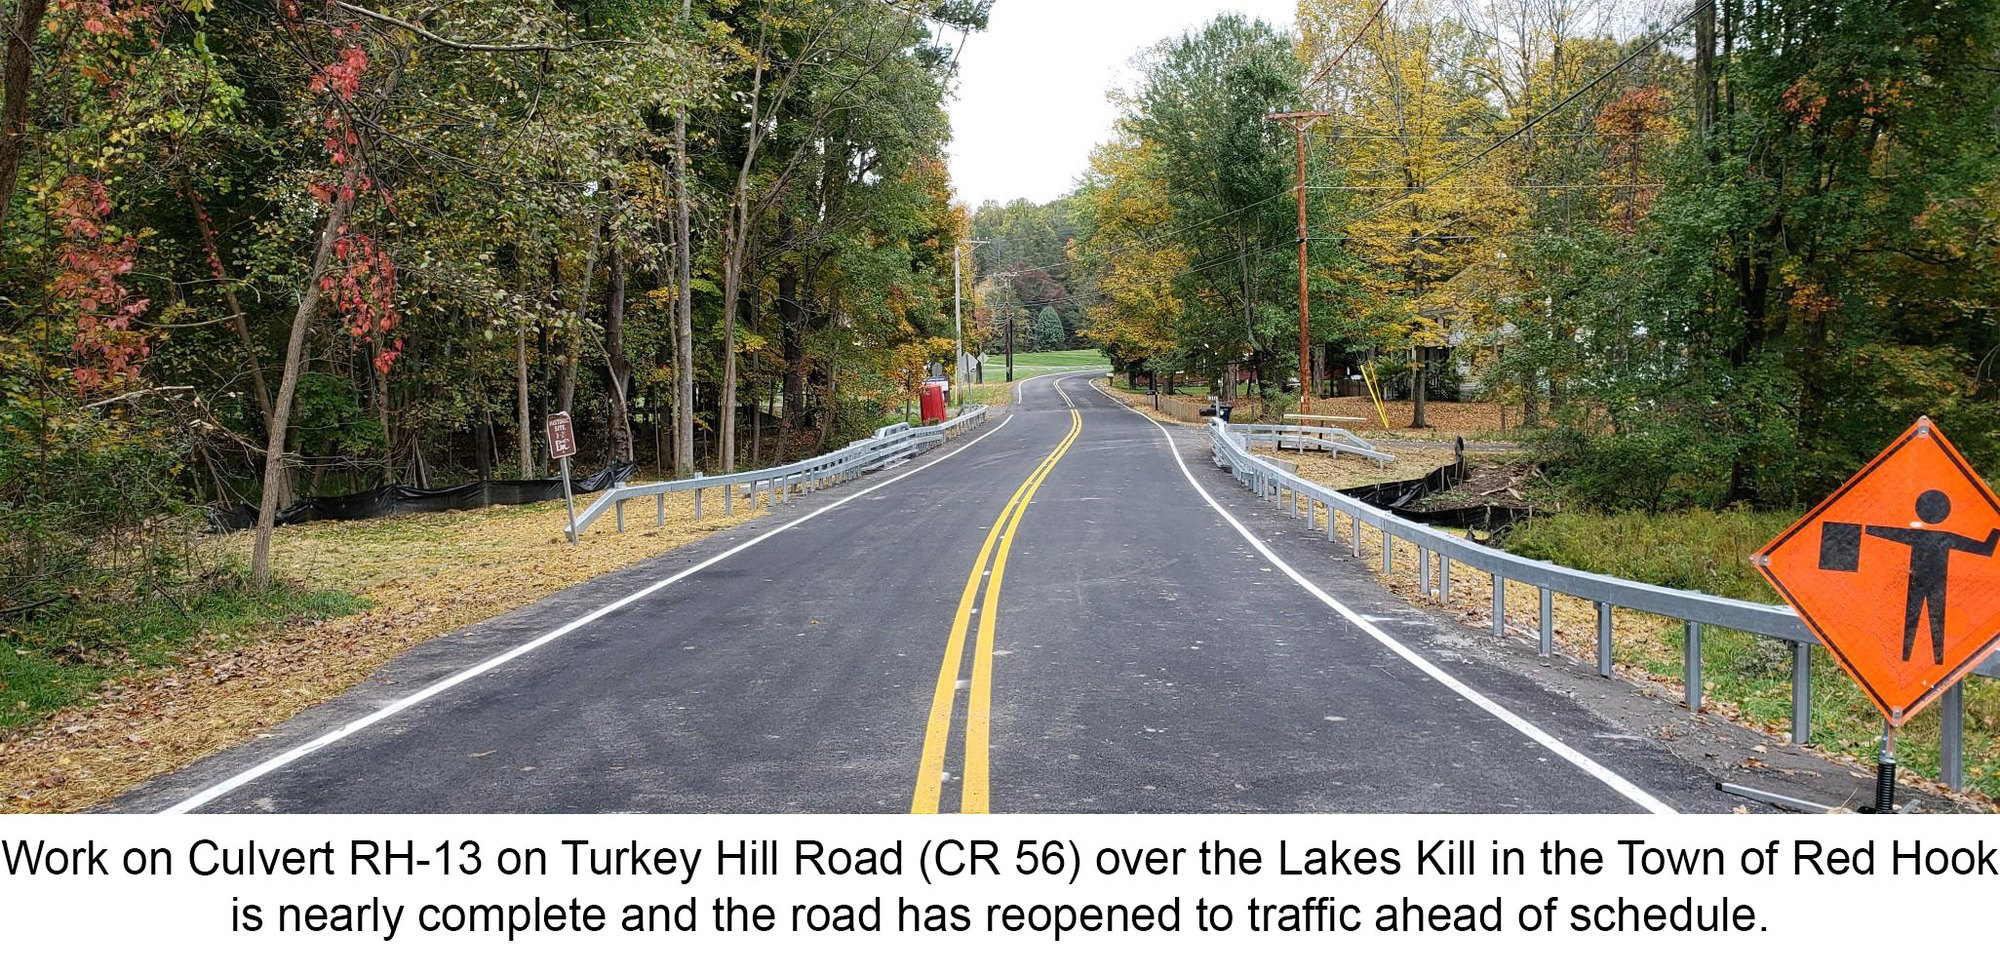 Turkey Hill Road (CR 56) in the Town of Red Hook has reopened to traffic ahead of schedule.